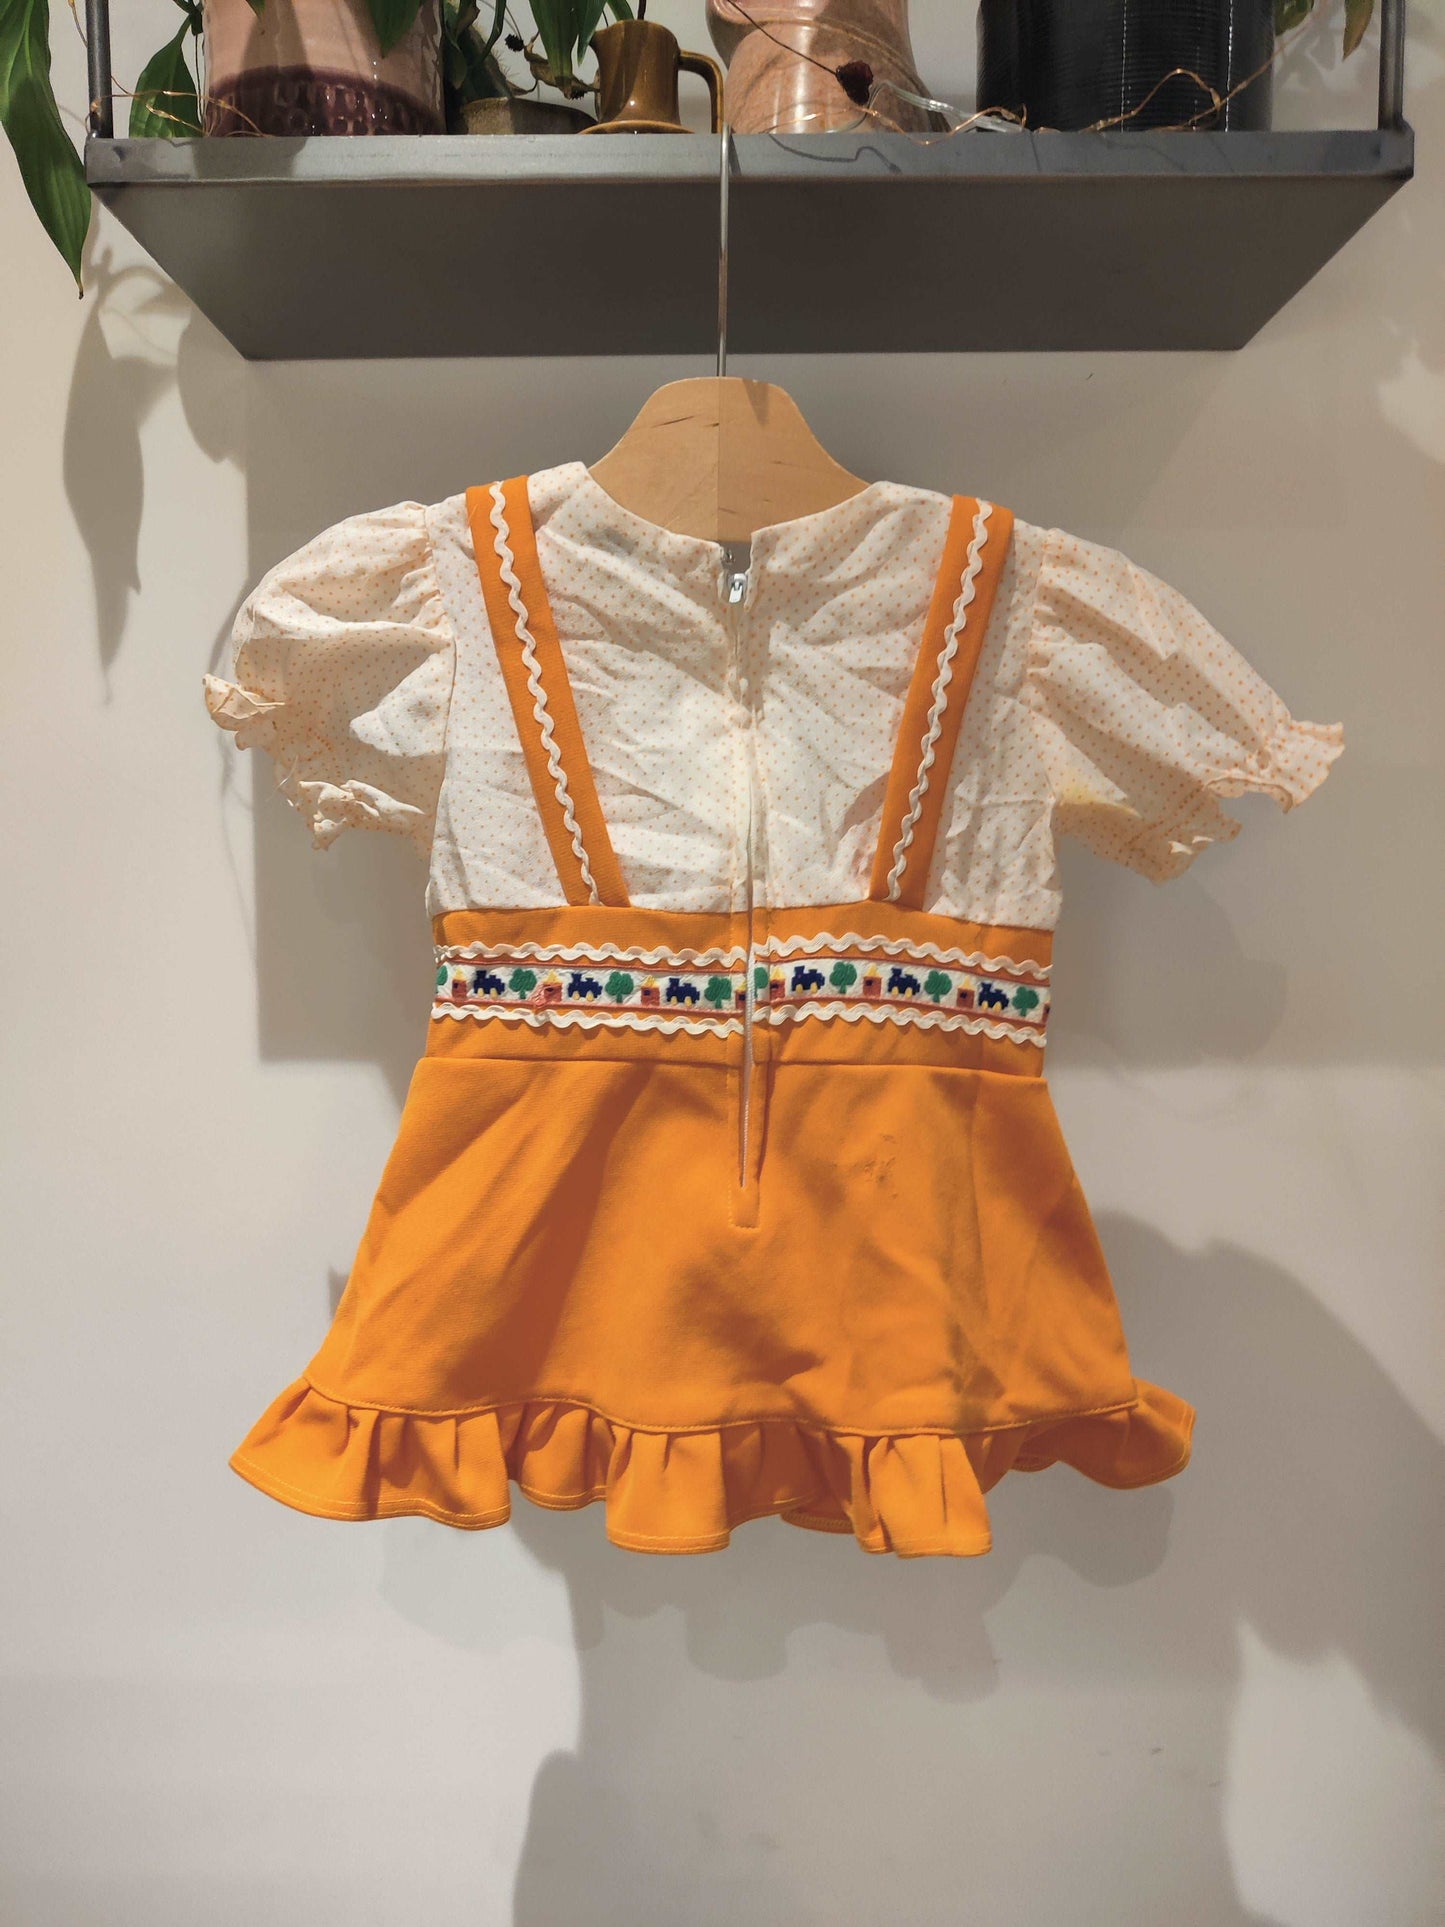 70s baby dress with faux braces. age 6 months